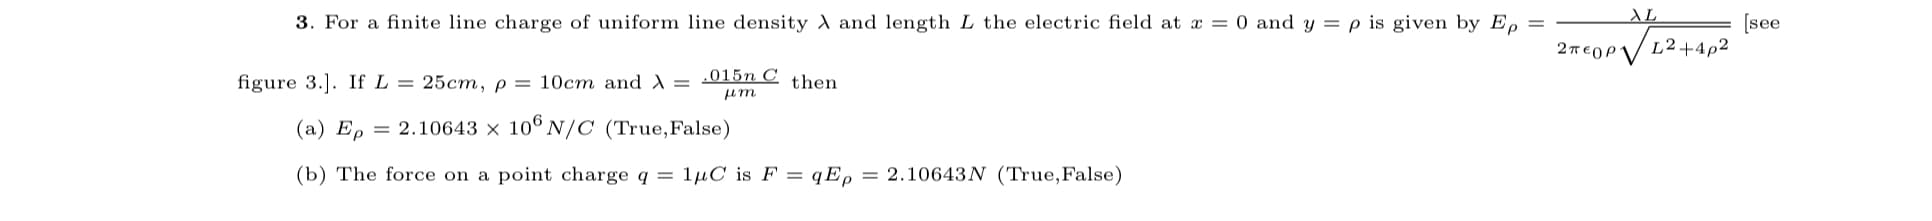 3. For a finite line charge of uniform line density and length L the electric field at a = 0 and y = p is given by E, =
AL
[see
figure 3.]. If L = 25cm,p = 10cm and A =
.015n C
then
um
(a) Ep
= 2.10643 x 106 N/C (True,False)
(b) The force on a point charge q = 1µC is F = qE, = 2.10643N (True,False)
